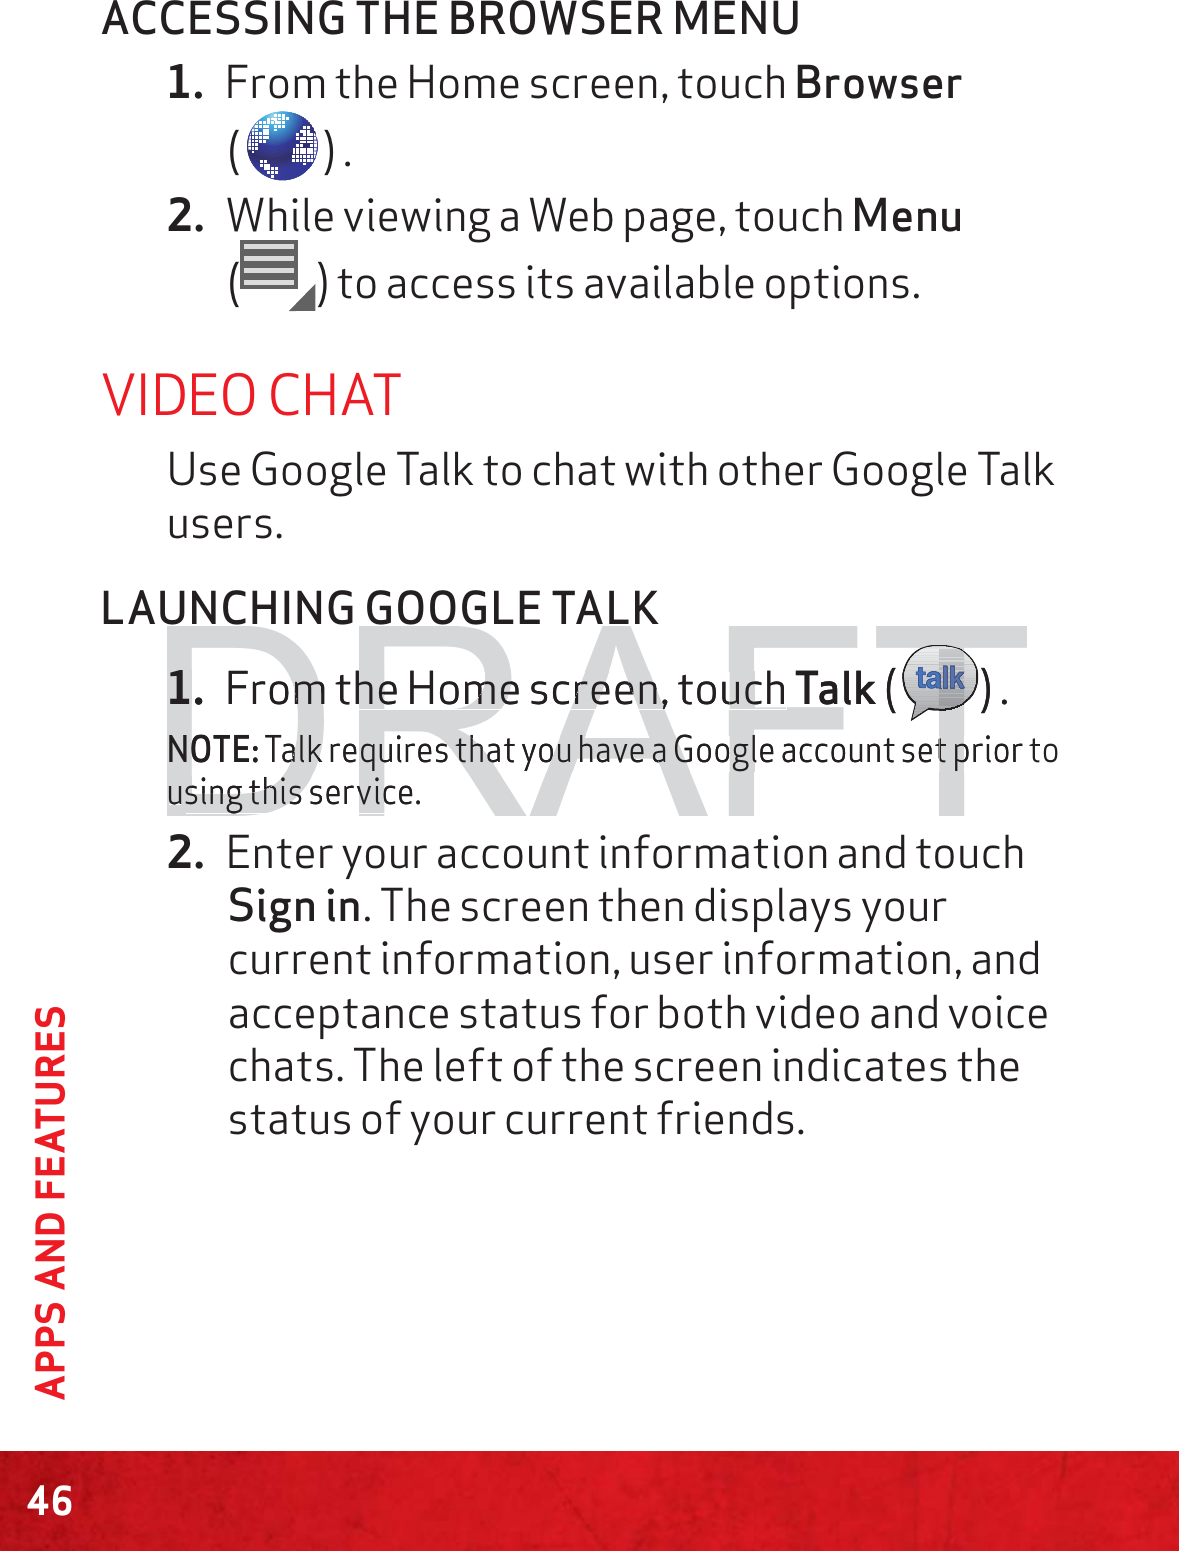 46APPS AND FEATURESACCESSING THE BROWSER MENU1. From the Home screen, touch Browser  () .2. While viewing a Web page, touch Menu  () to access its available options.VIDEO CHATUse Google Talk to chat with other Google Talk users.LAUNCHING GOOGLE TALK1. From the Home screen, touch Talk ( ) .NOTE: Talk requires that you have a Google account set prior to using this service.2. Enter your account information and touch Sign in. The screen then displays your current information, user information, and acceptance status for both video and voice chats. The left of the screen indicates the status of your current friends.DRAFT1.1From tmhe Home screen, touch he Home screen, touch Talk (TTTTTTTTTTTTTTTTTTTTTTTTTTTTTTTTTTTTTTTTTTTTTTTTTTTTTTTTTTTTTTTTTTTTTTTTTTTTTTTTTTTTTTTTTTTTTTTTTTTTTTTTT) .NNOOTE:Talk requires that you have a Google account set prior alk requires that you have a Google account set puusing this service.sing this servic